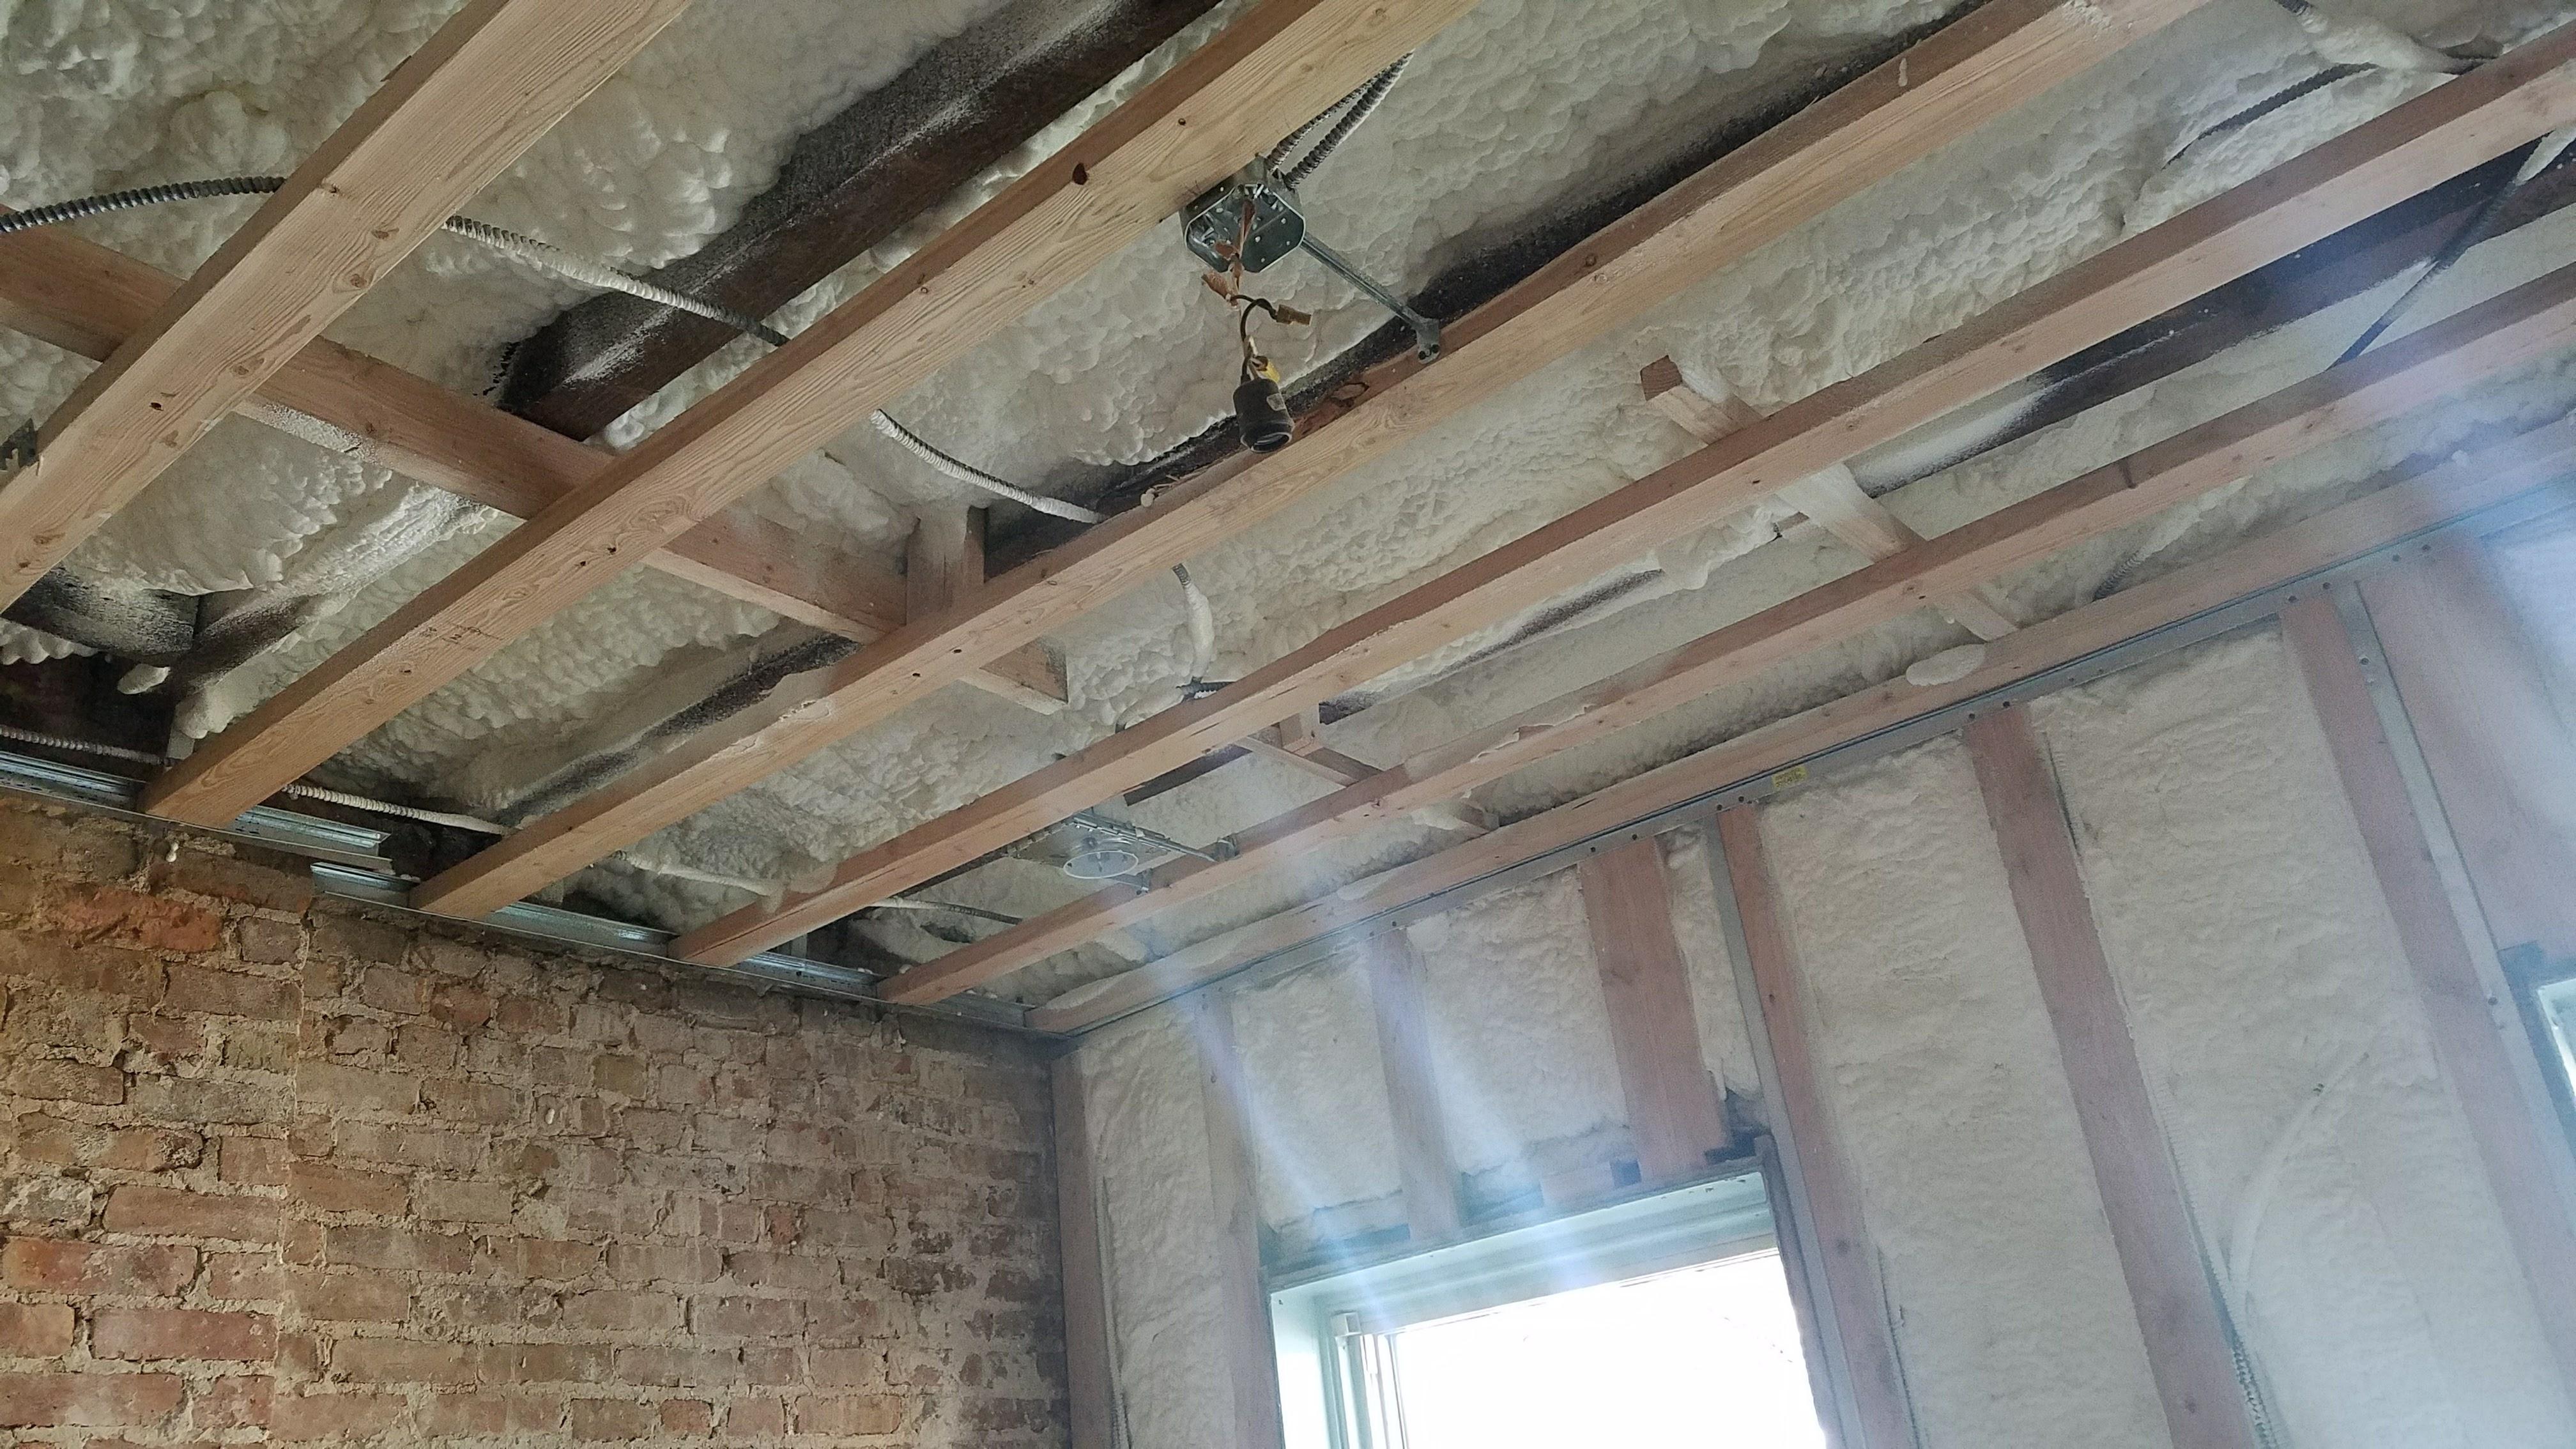 Insulation For Walls, Ceiling, Basement - Brooklyn, NY 11216